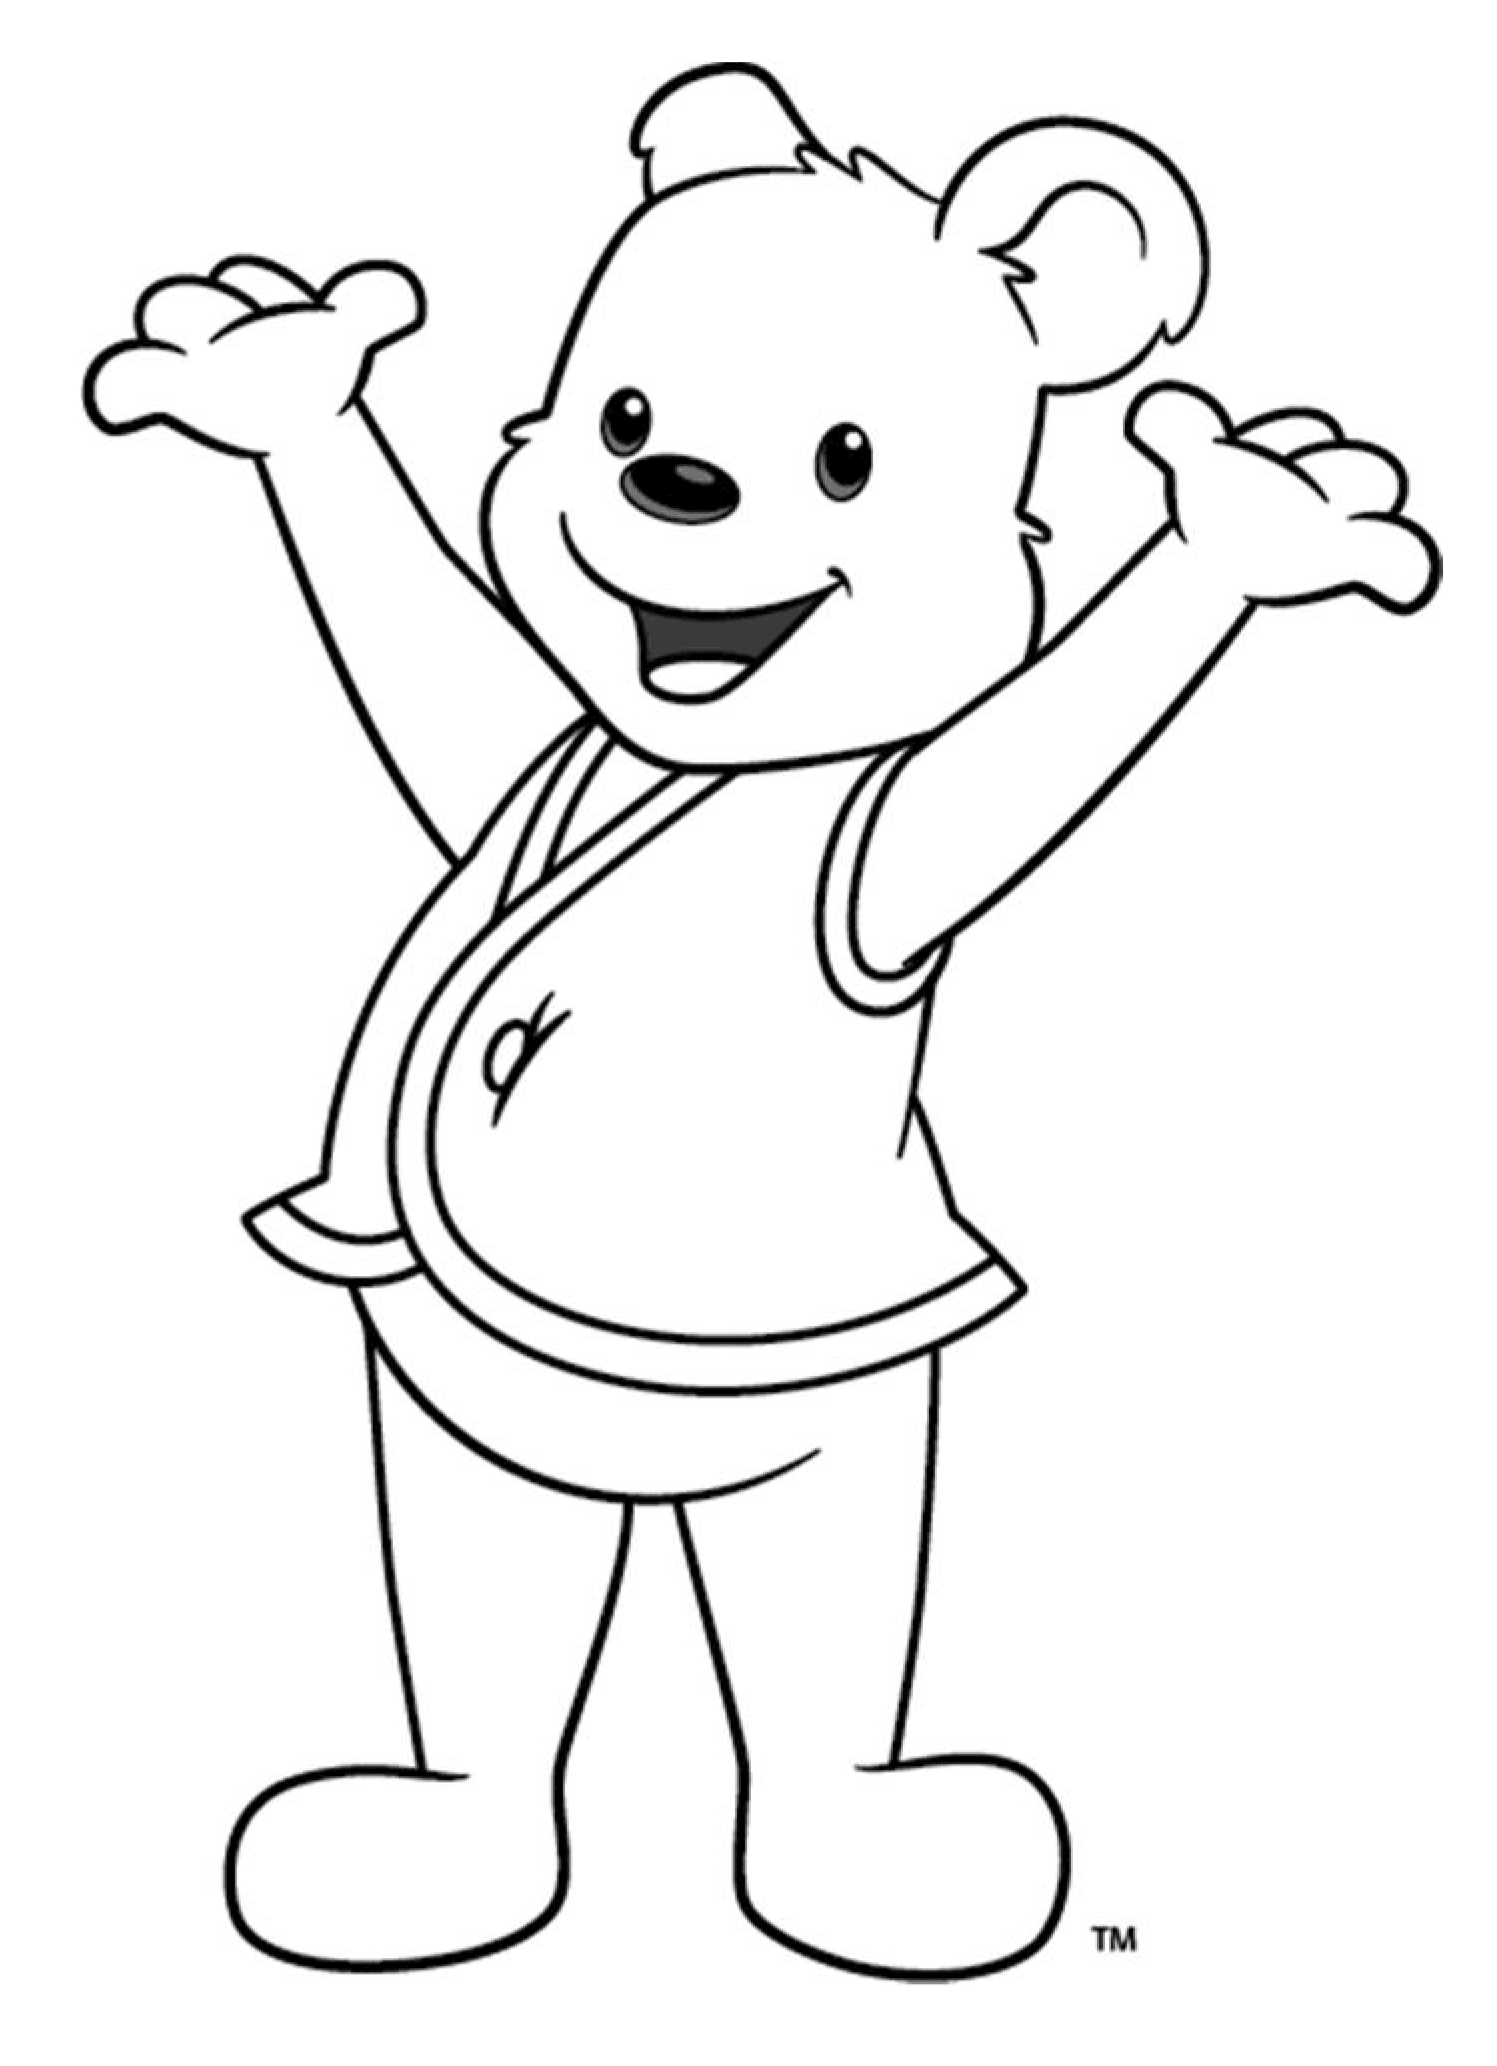 Awana Cubbies Coloring Page - Coloring Home